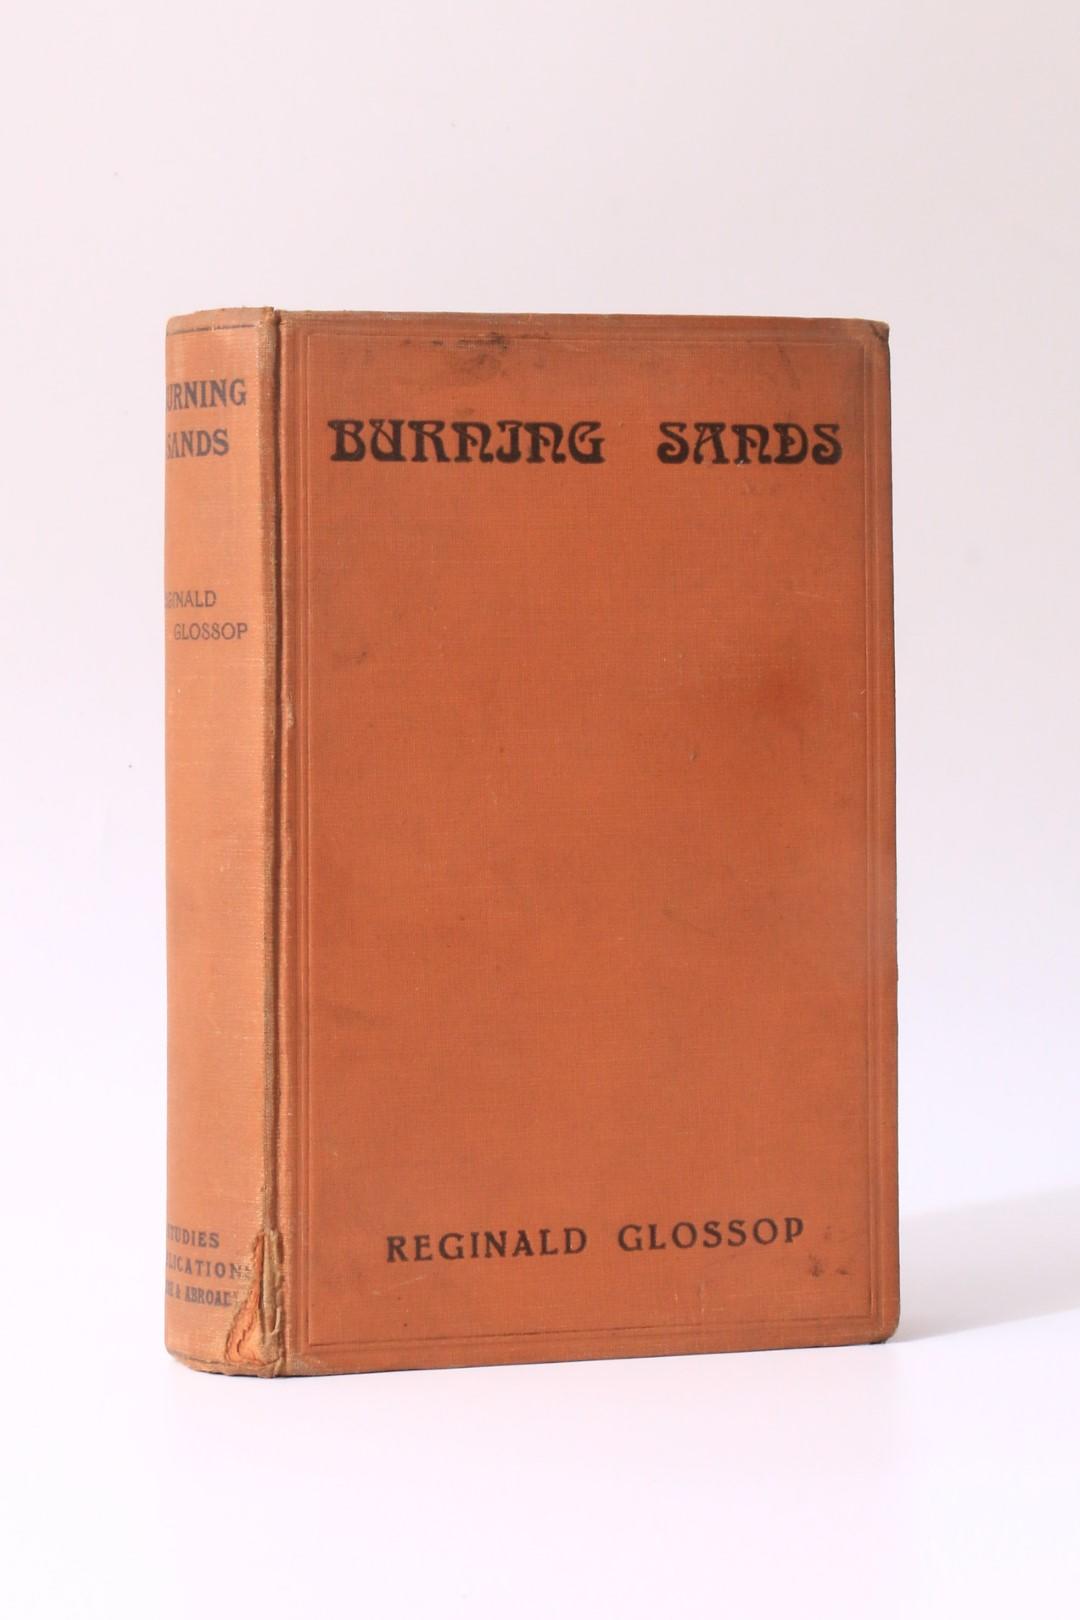 Reginald Glossop - Burning Sands - Studies Publications (Home & Abroad), 1928, Signed First Edition.